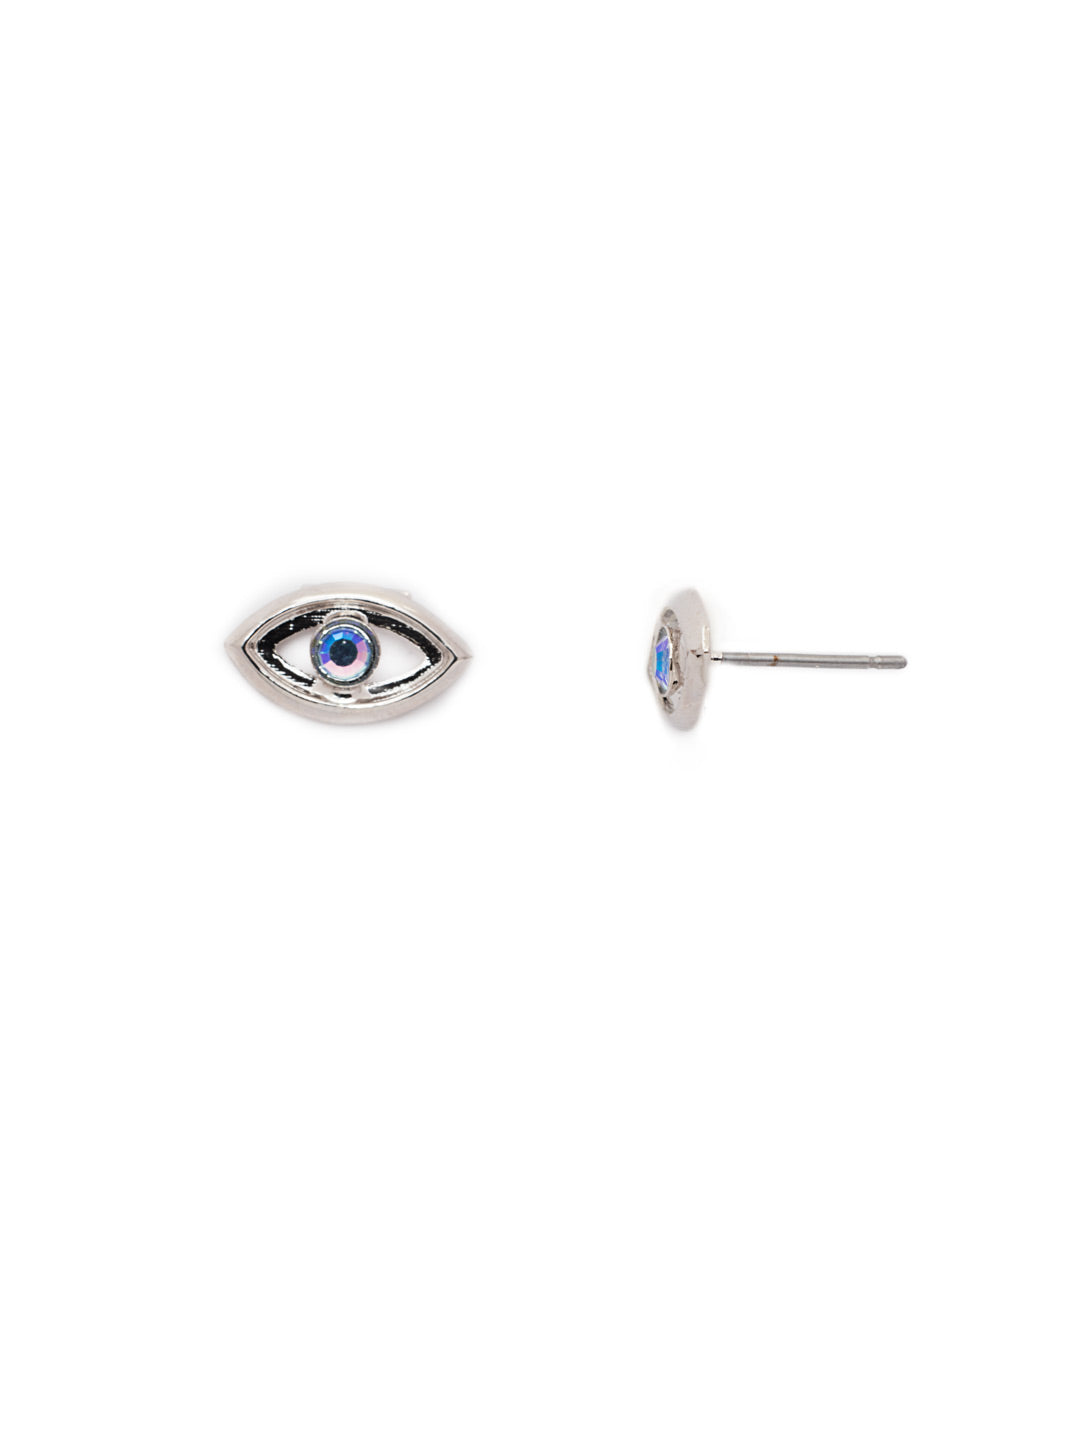 Evil Eye Stud Earring - EEV66PDWNB - <p>Our Evil Eye Stud Earrings are simple must-haves for lovers of the symbol. Just fasten them on and go. They're great pieces to add to a casual wear day. From Sorrelli's Windsor Blue collection in our Palladium finish.</p>